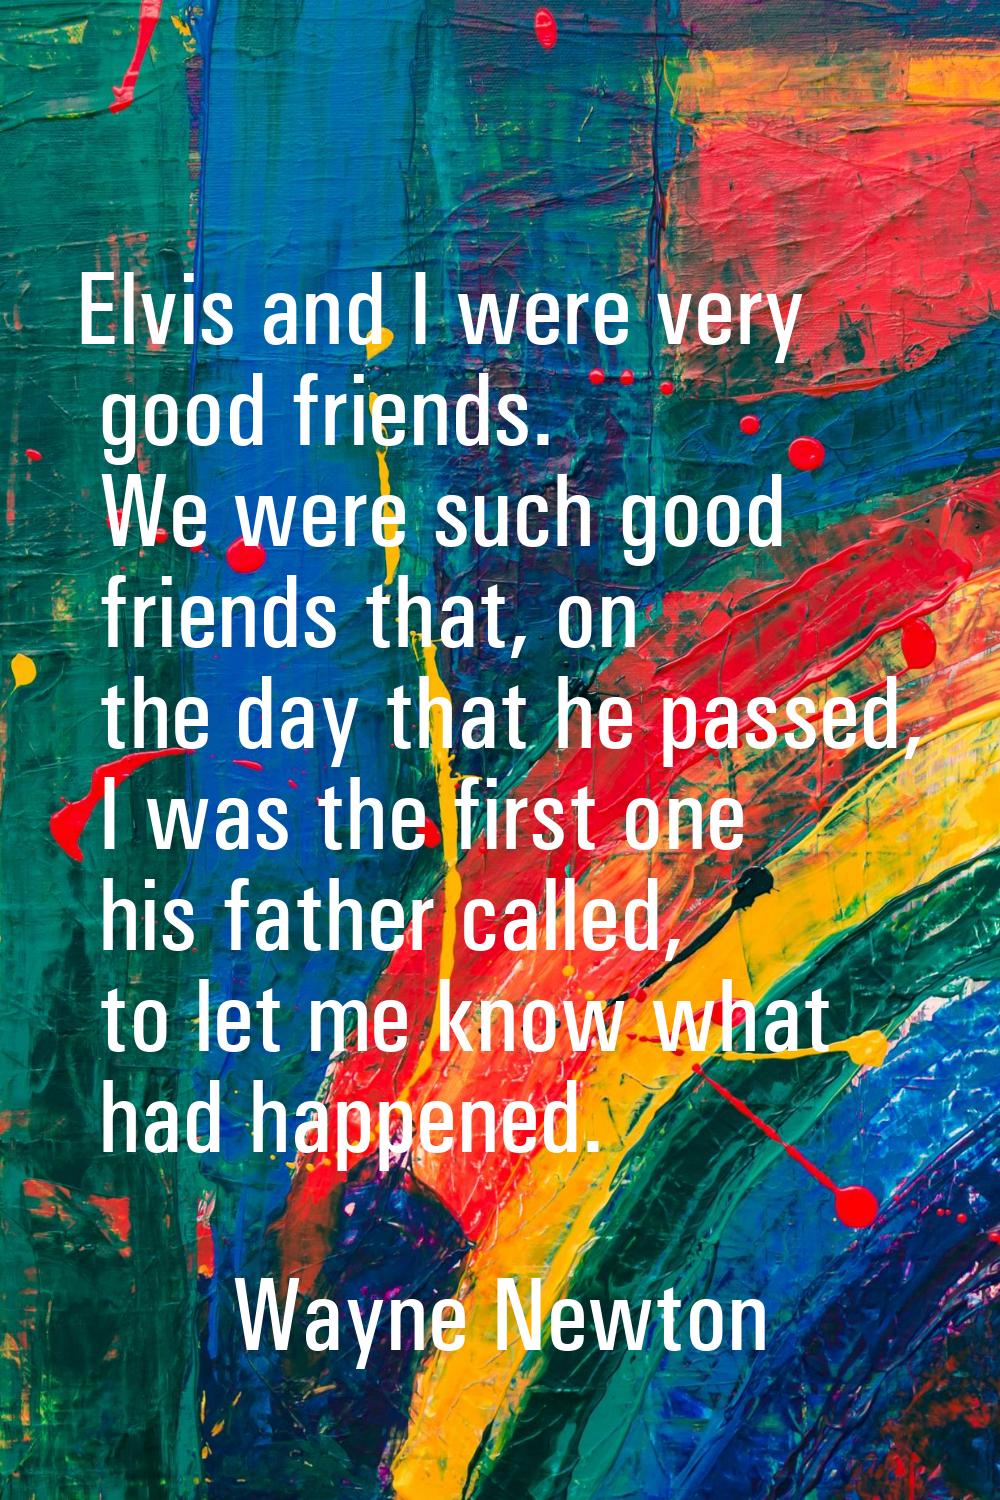 Elvis and I were very good friends. We were such good friends that, on the day that he passed, I wa